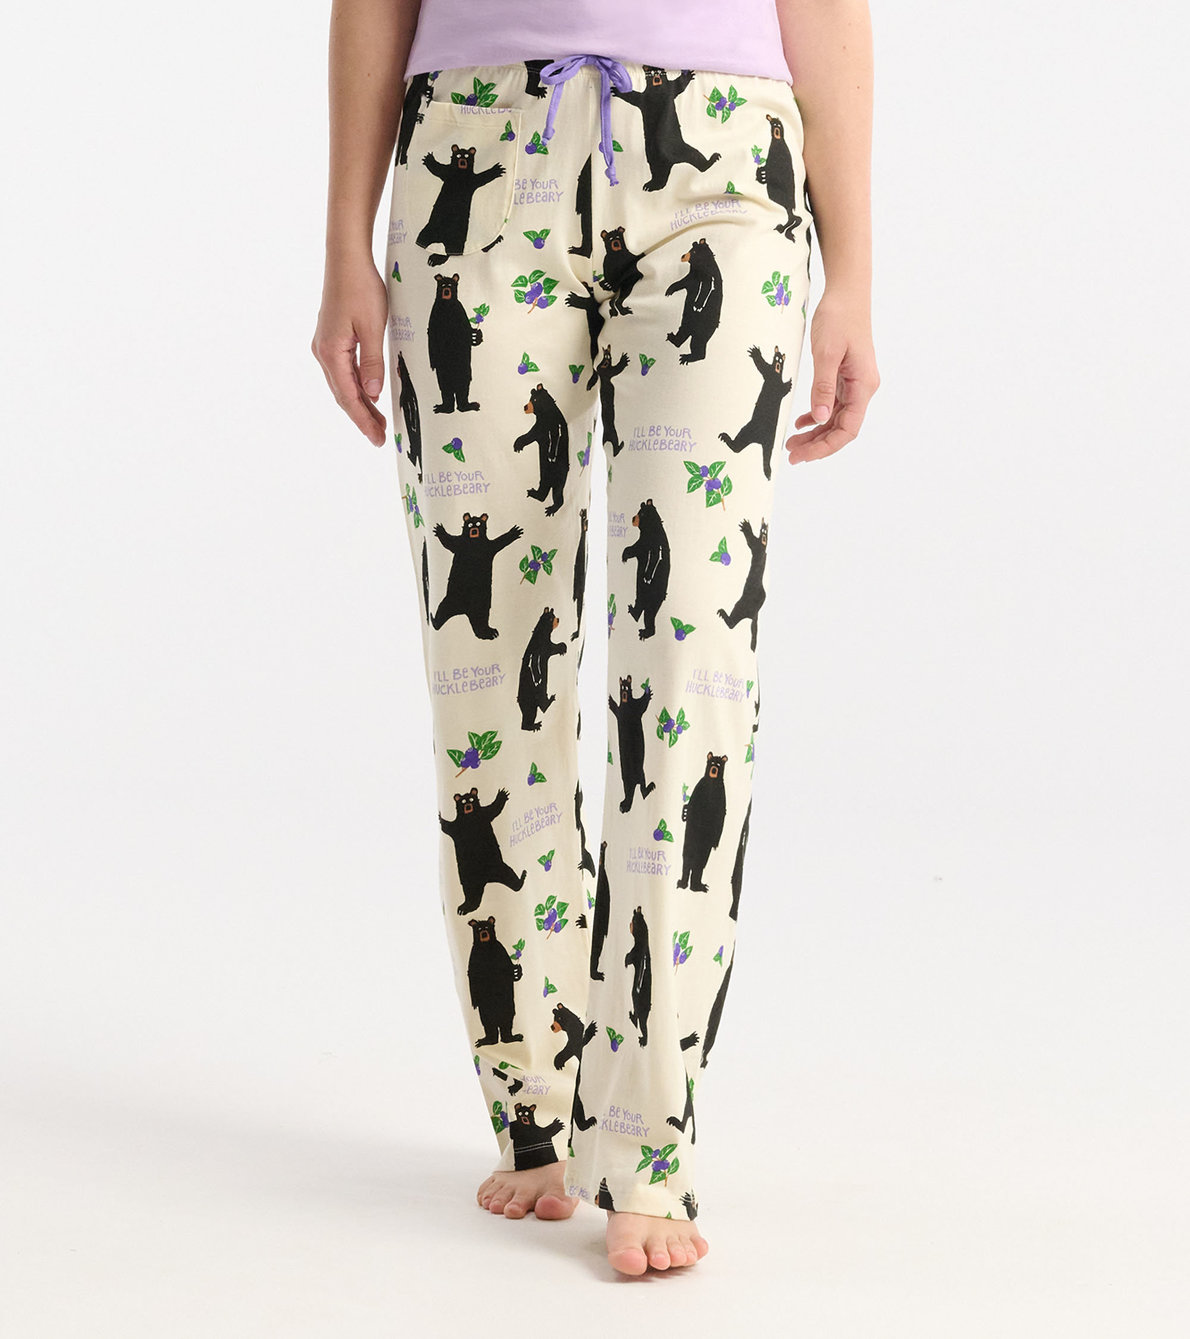 View larger image of Hucklebeary Women's Jersey Pajama Pants